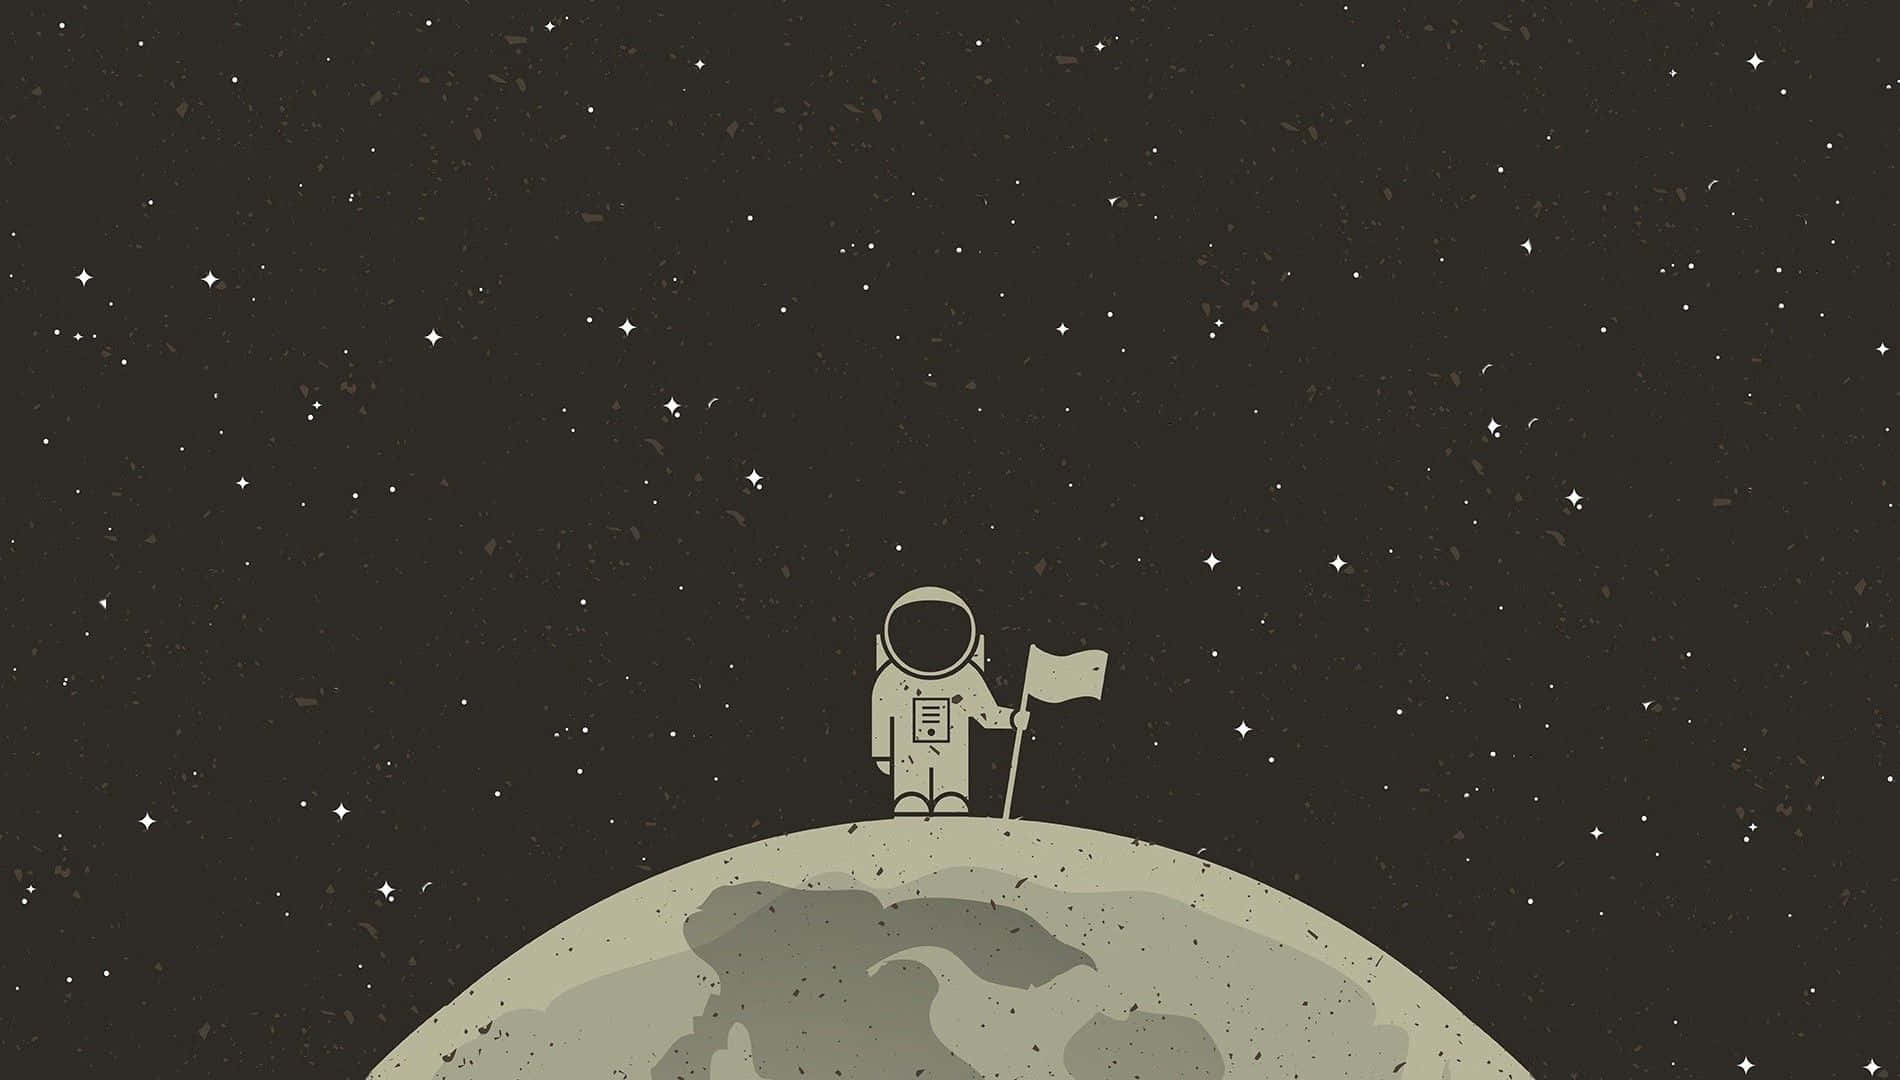 Explore The World Beyond With This Cute Astronaut And His Space Adventure. Background